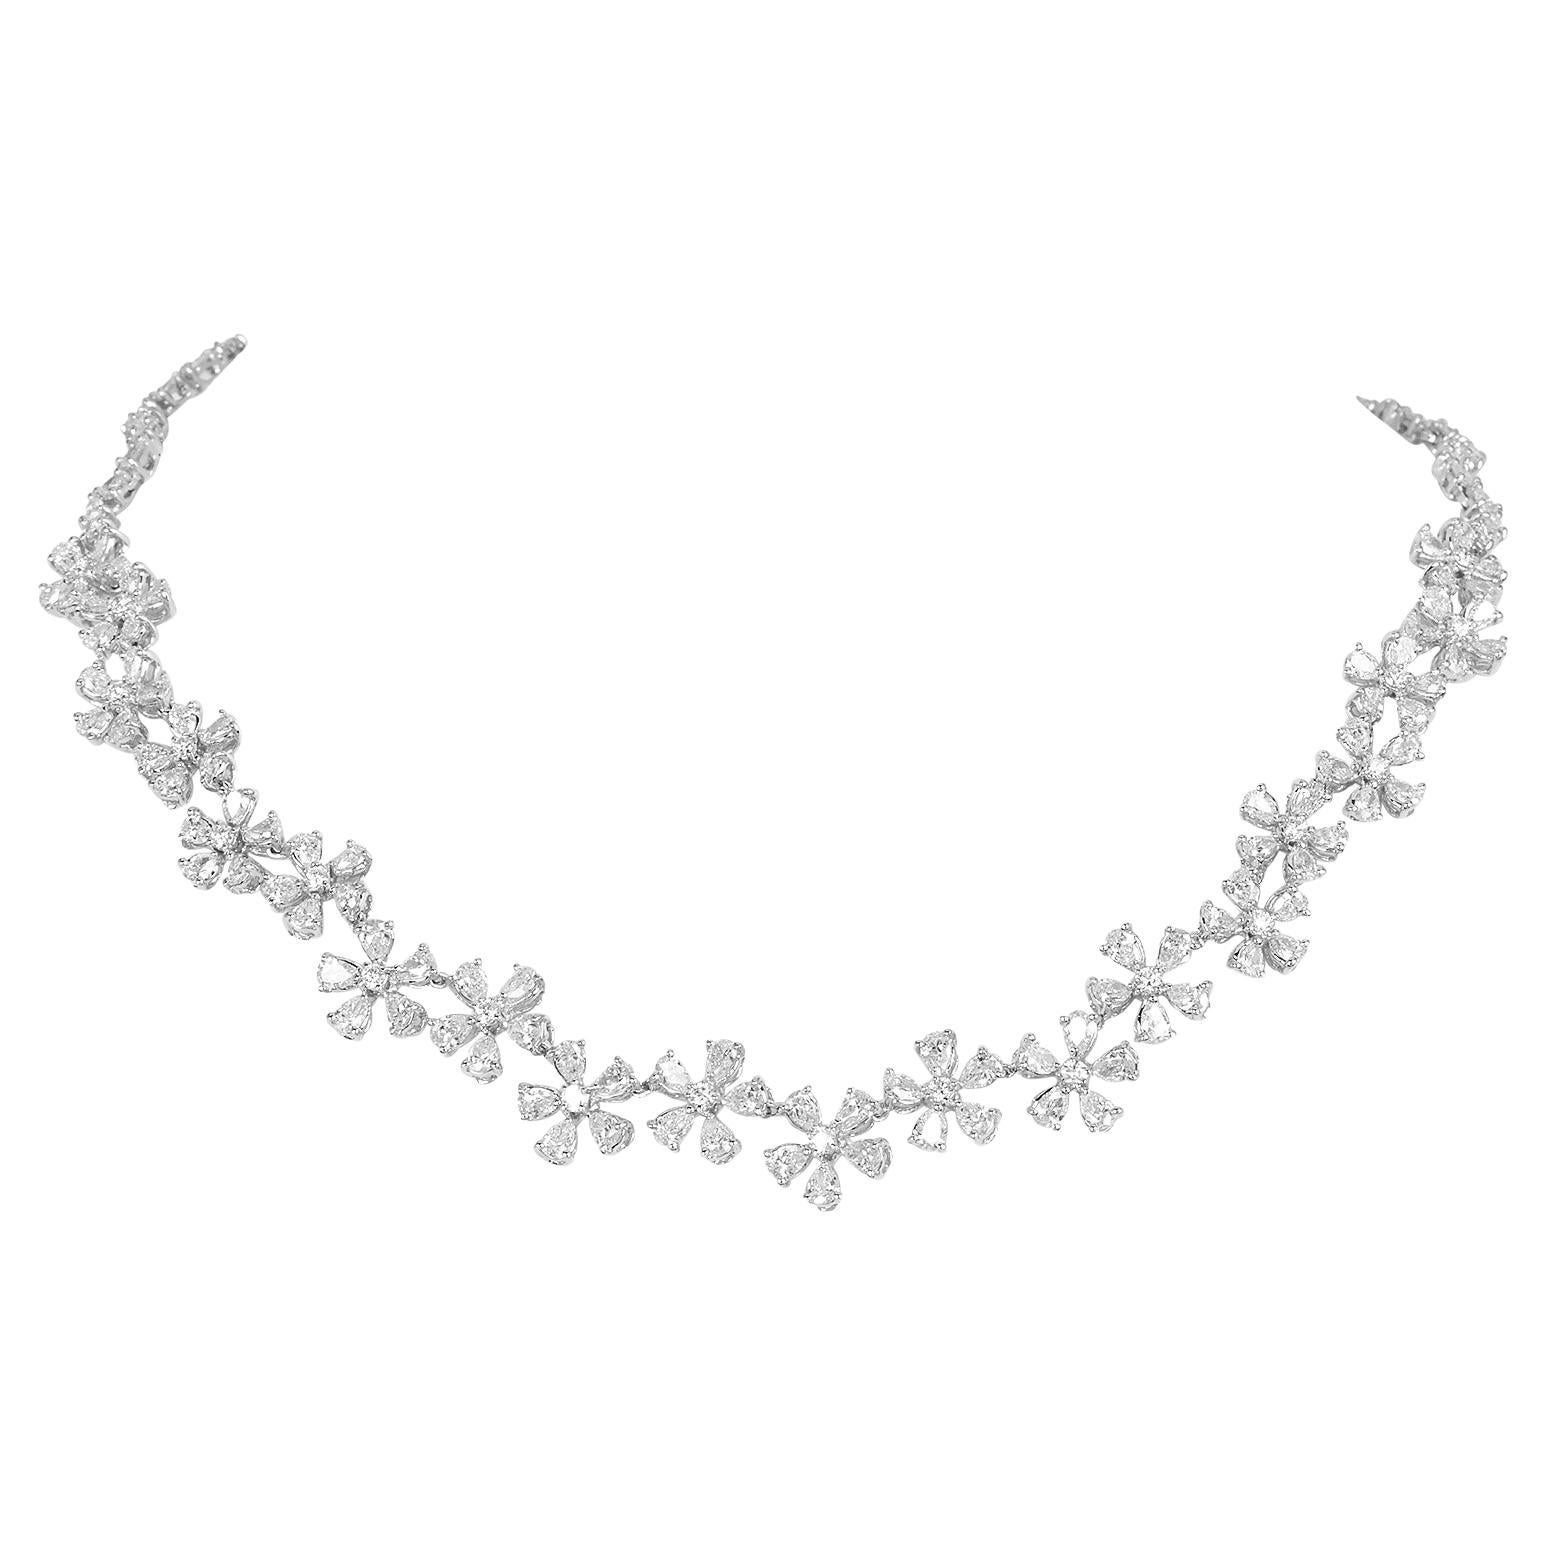 ZYDO 24.50cts Pear Diamond Gold Floral Link Tennis Necklace 